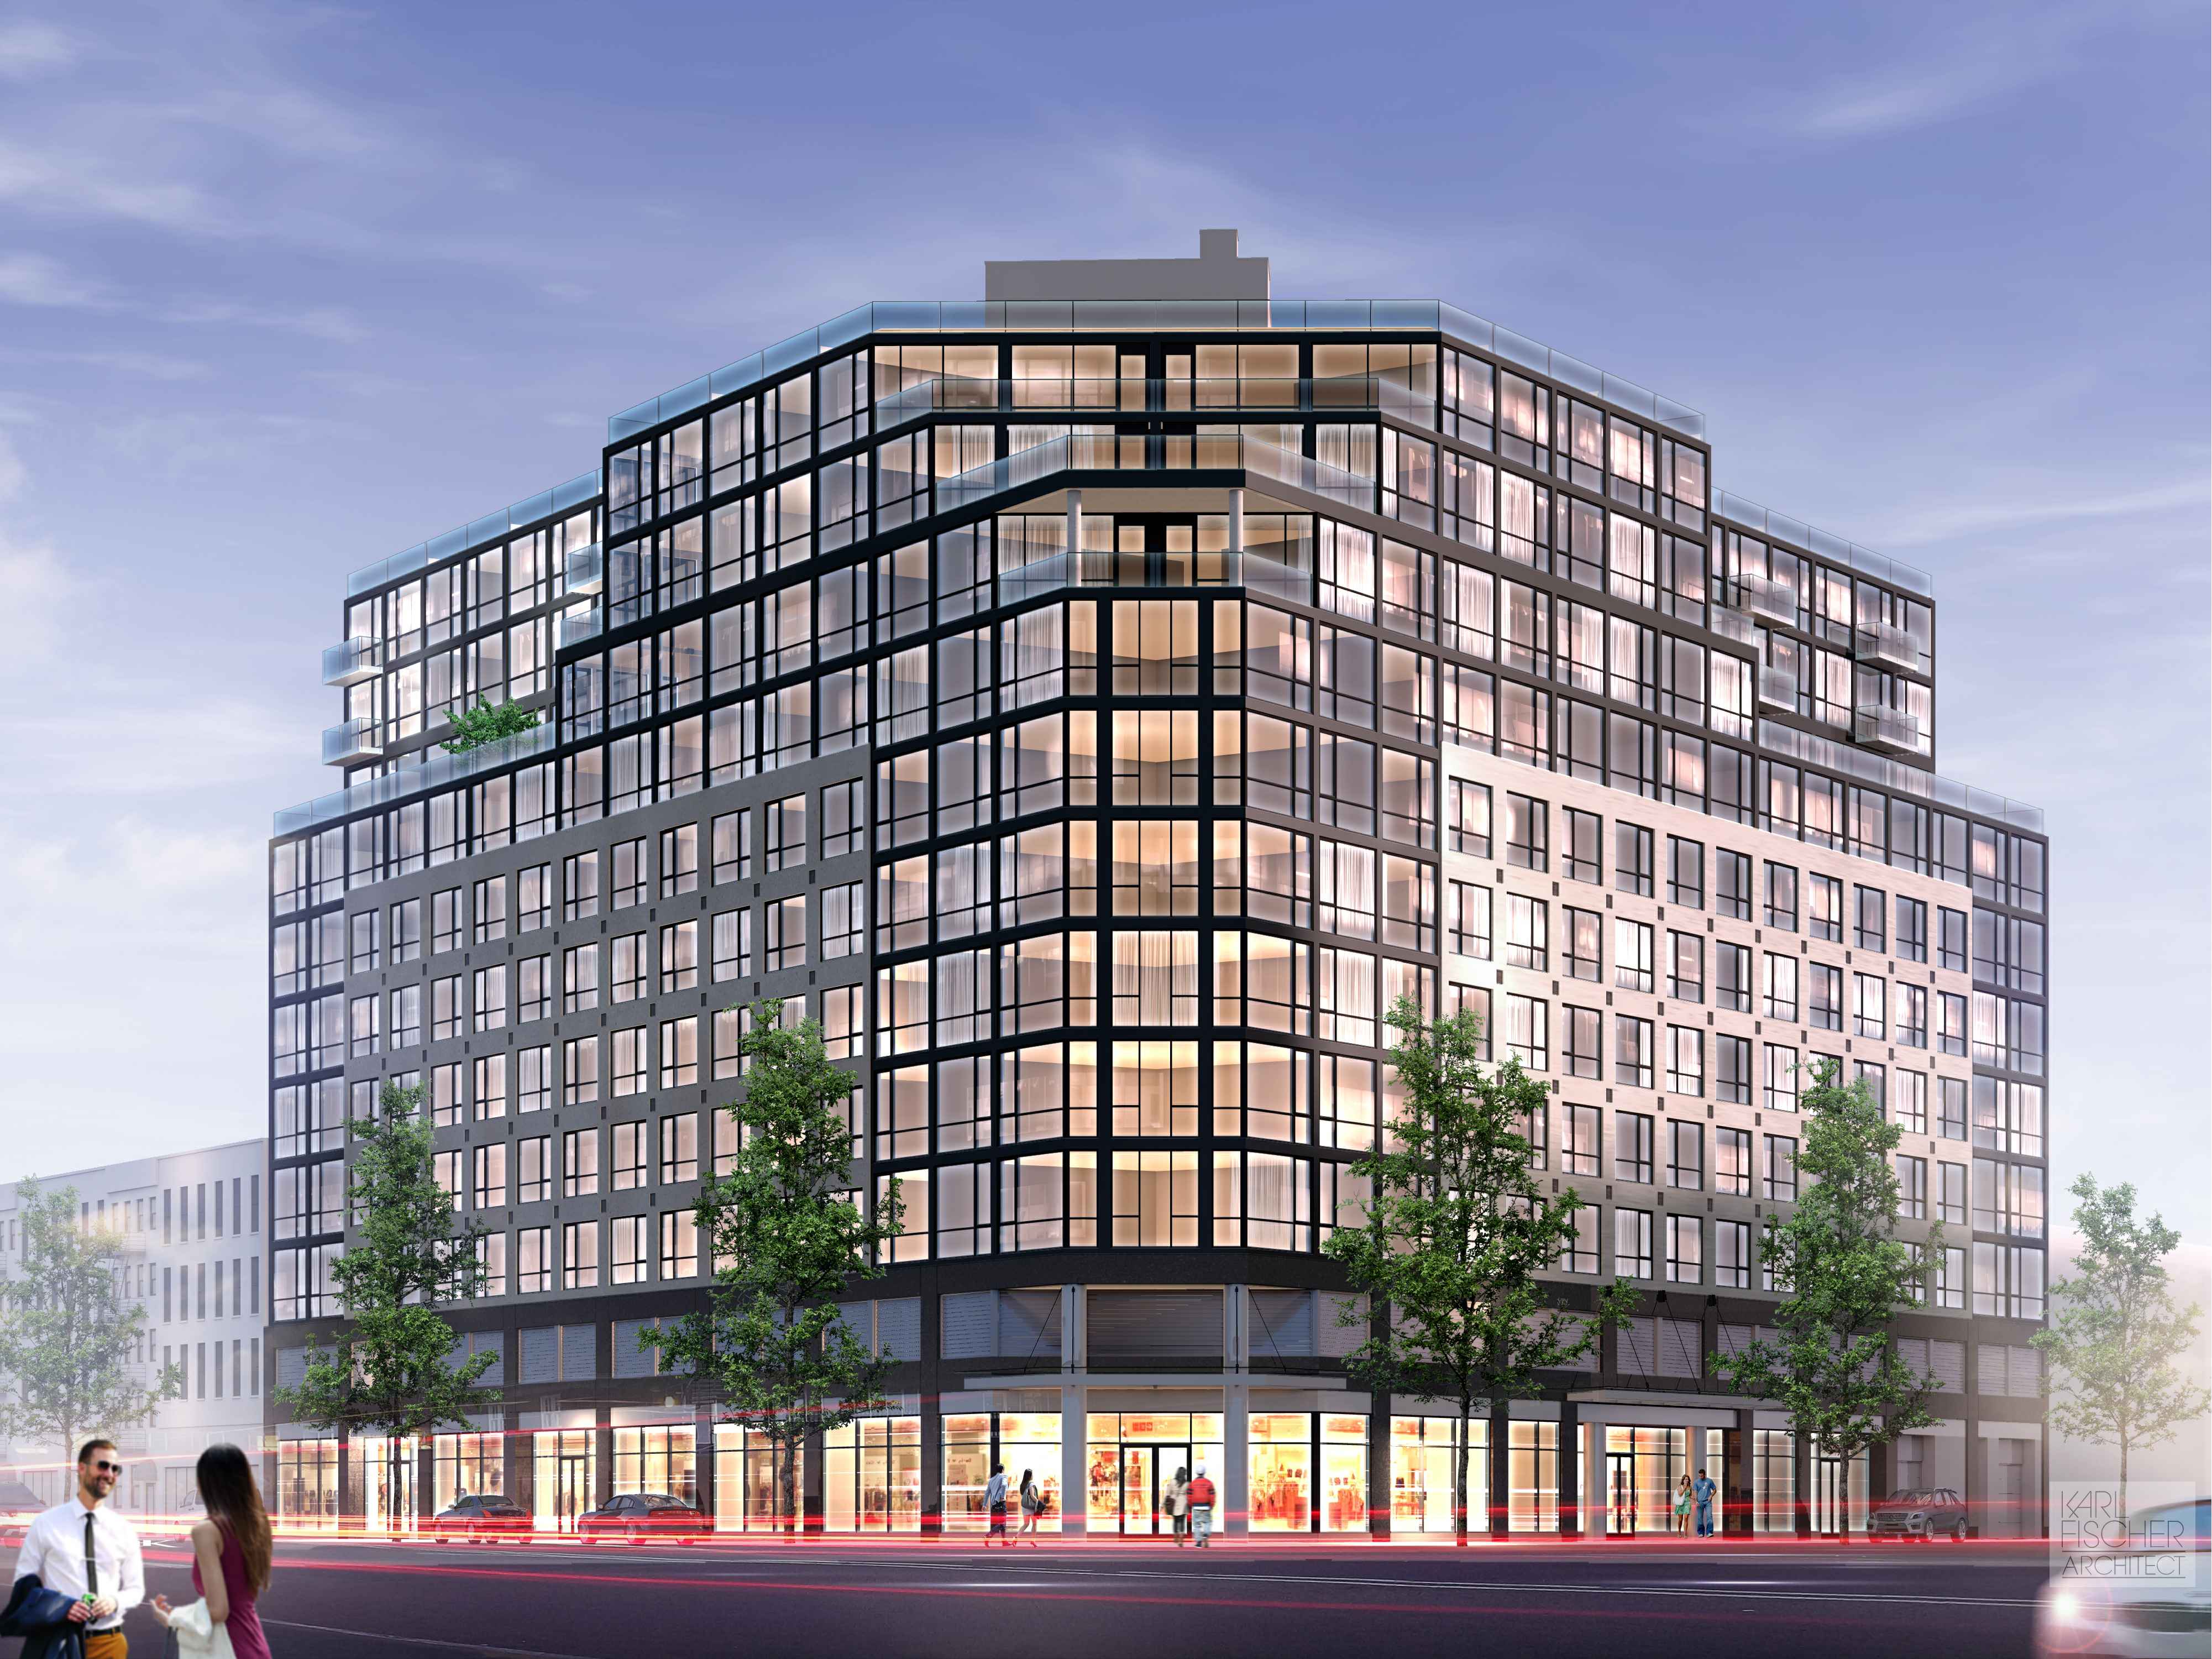 11-Story Mixed-Use Building Revealed at 1134 Fulton Street, Bed-Stuy